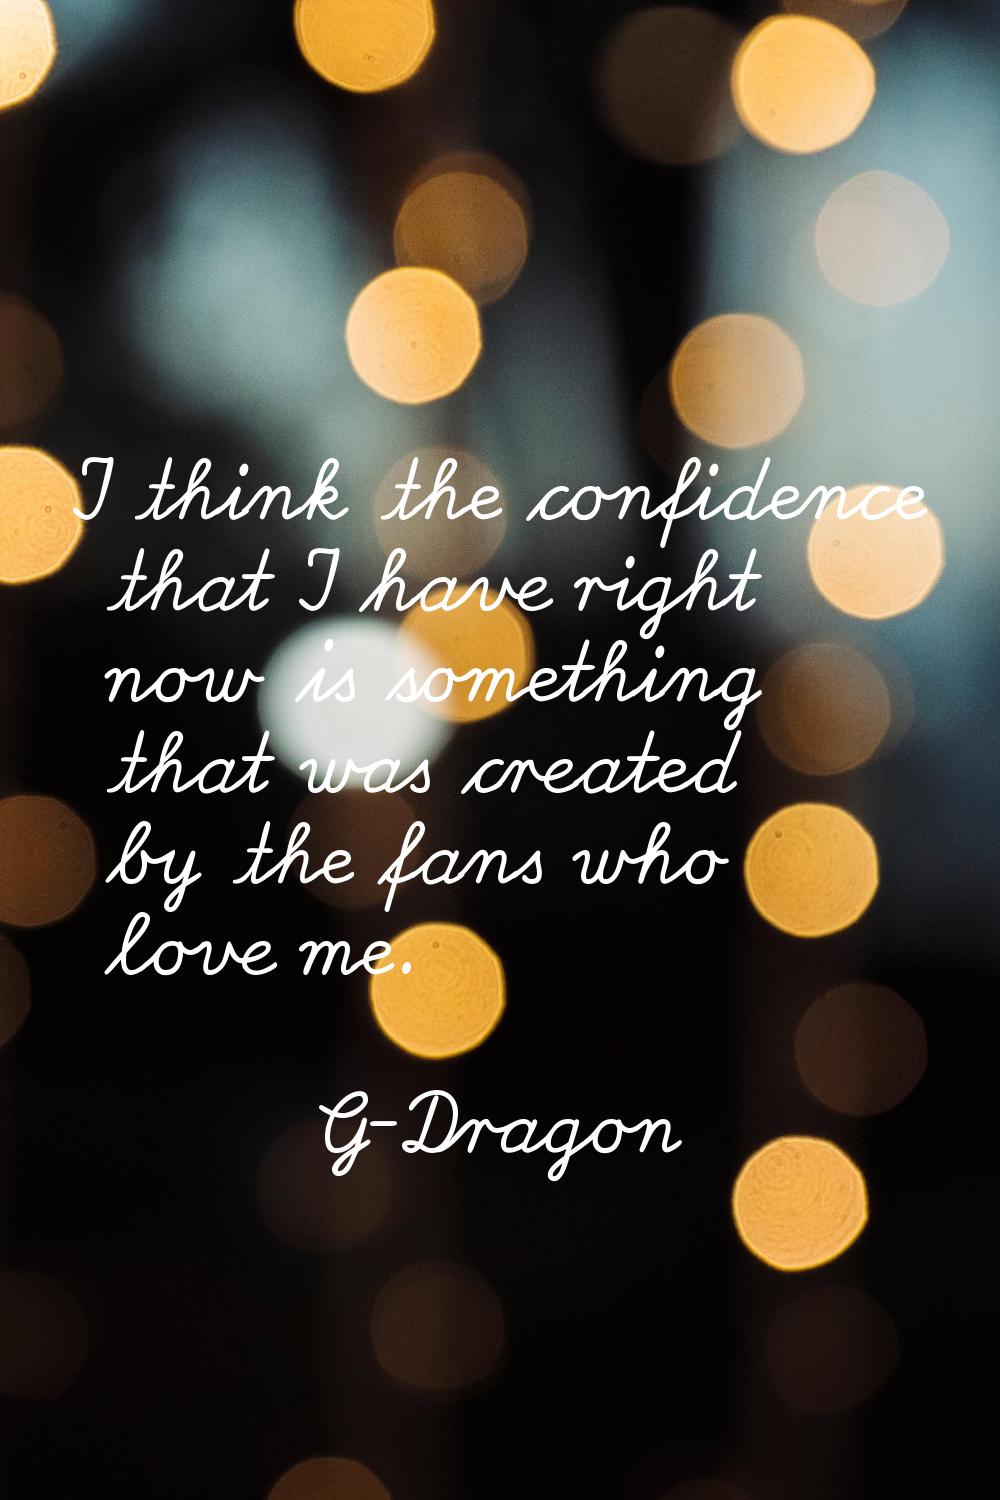 I think the confidence that I have right now is something that was created by the fans who love me.